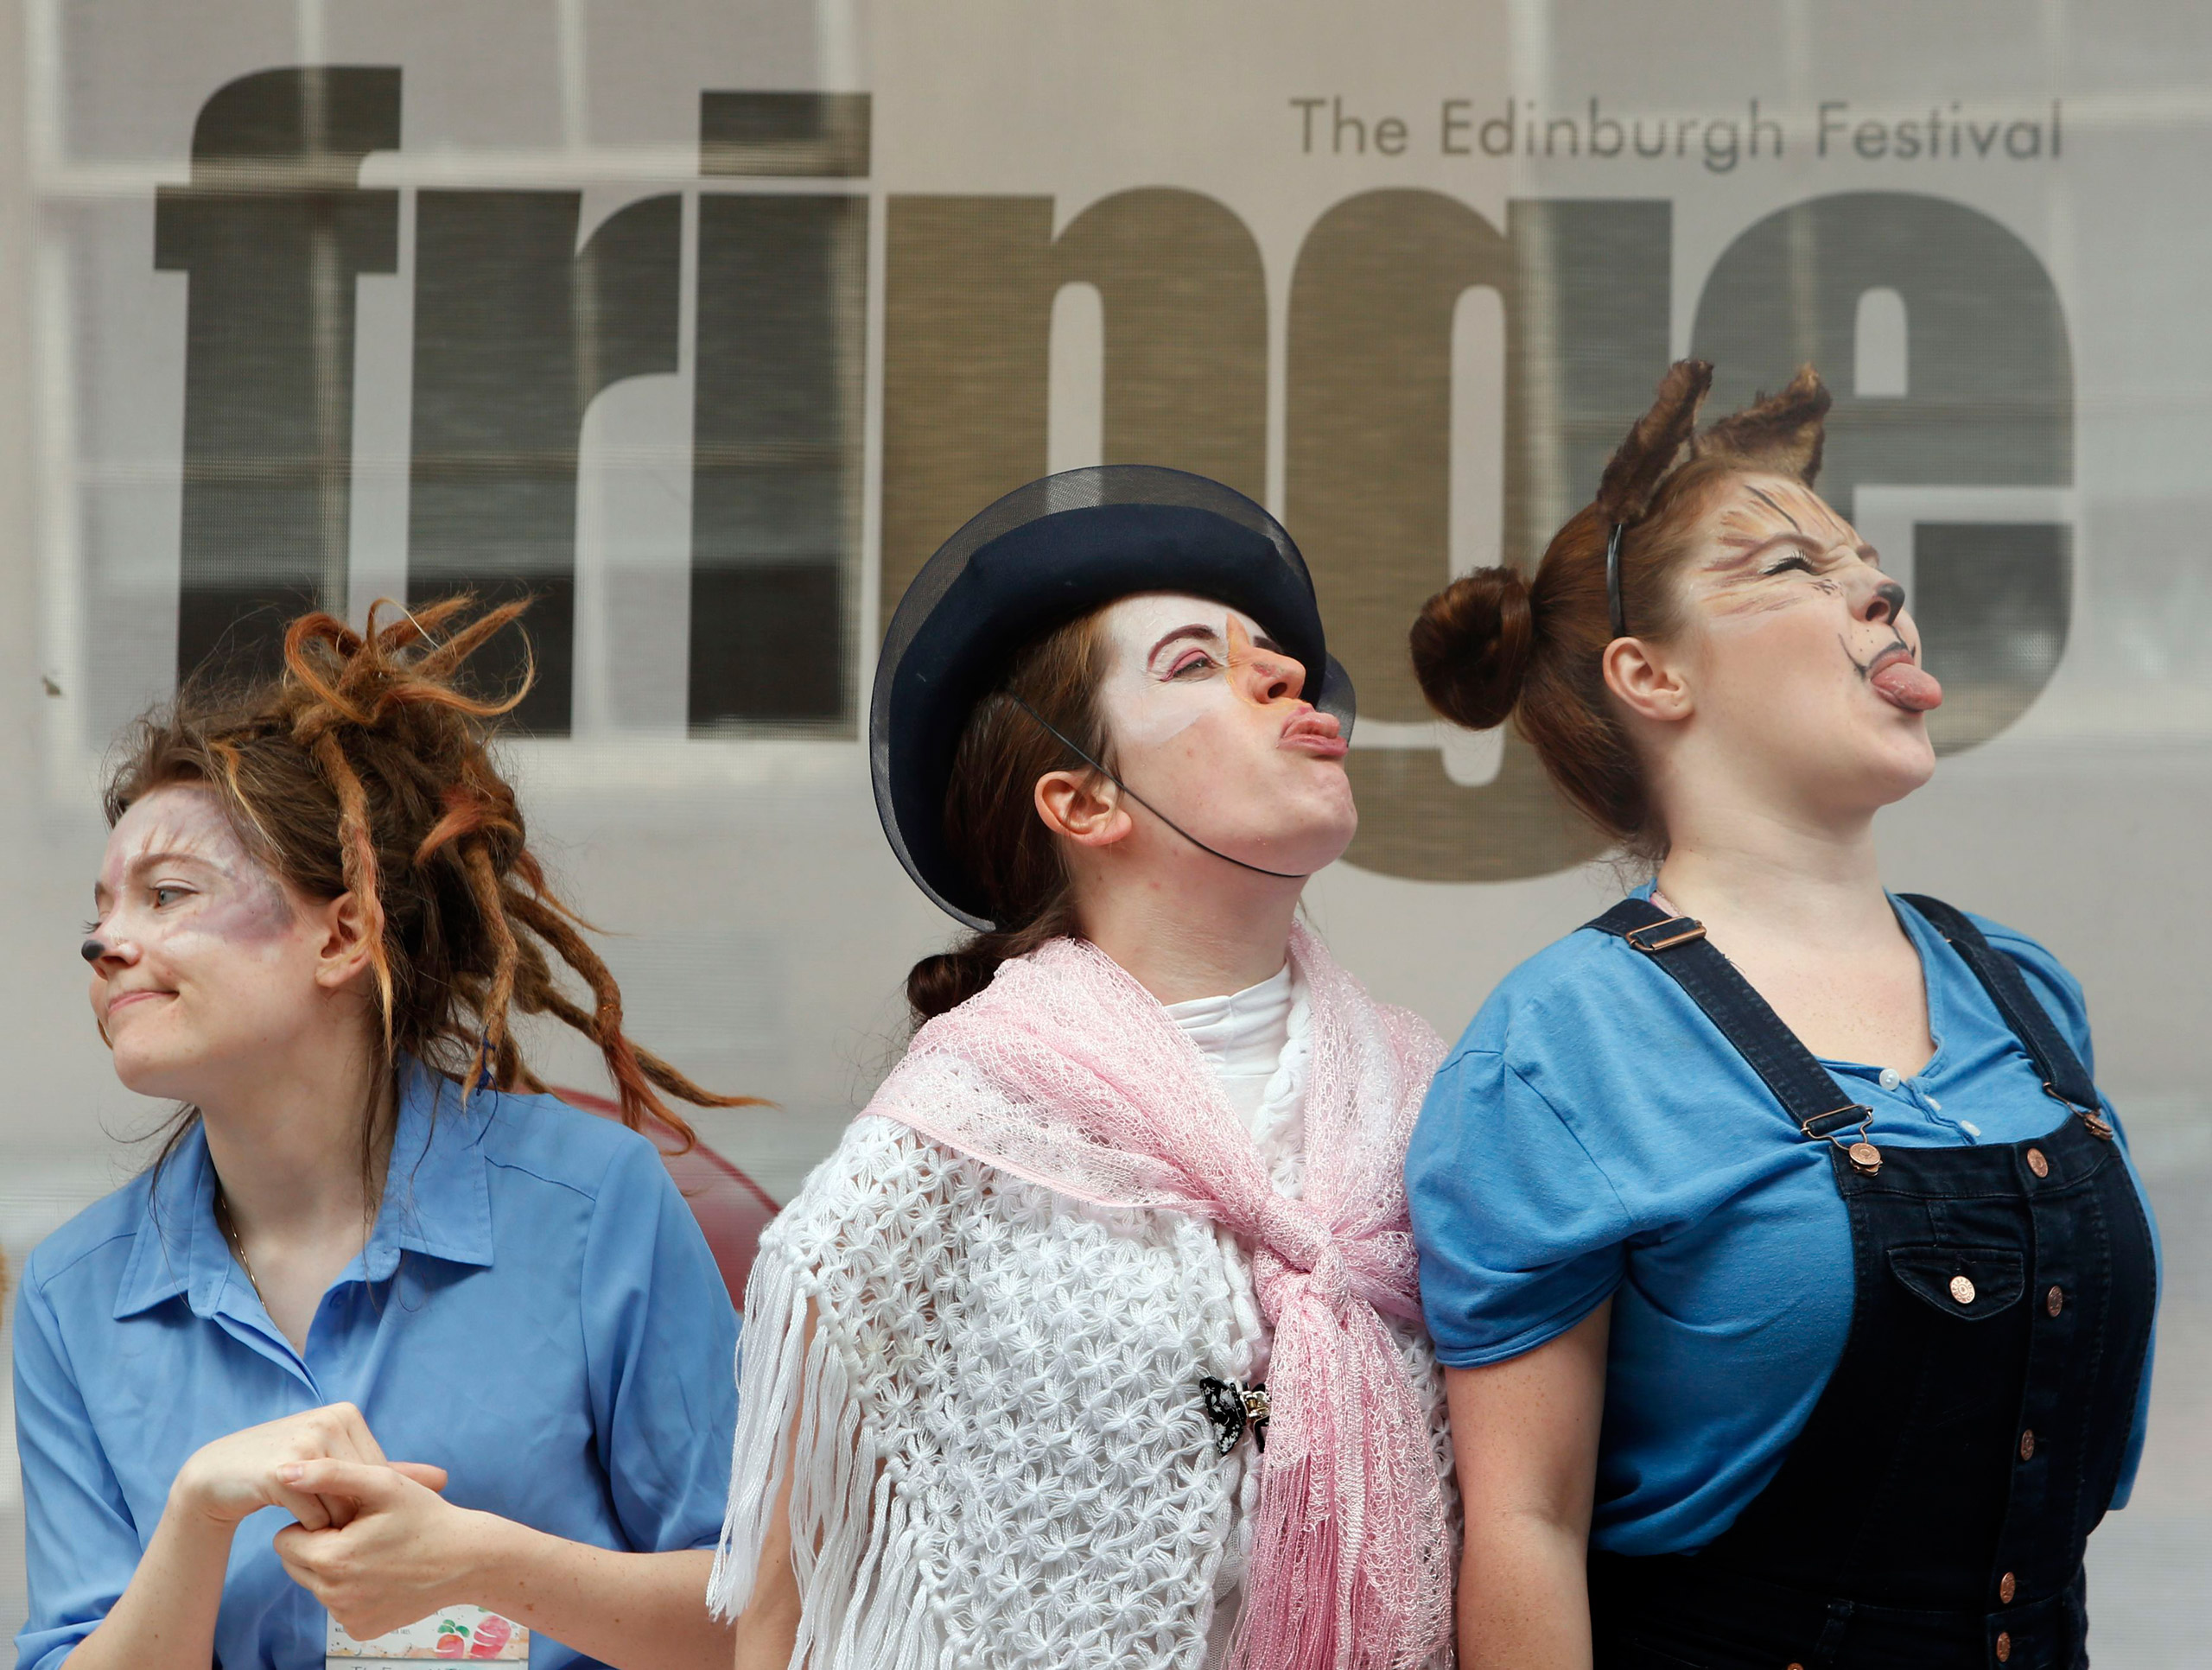 Edinburgh Fringe Festival 2015. Performers from The Emerald Theatre promote their Edinburgh Festival Fringe show on the Royal Mile in Edinburgh. Picture date: Monday August 24, 2015. The Edinburgh Festival Fringe is the largest arts festival in the world and takes place every August for three weeks in Scotland's capital city. Photo credit should read: Danny Lawson/PA Wire URN:23902956